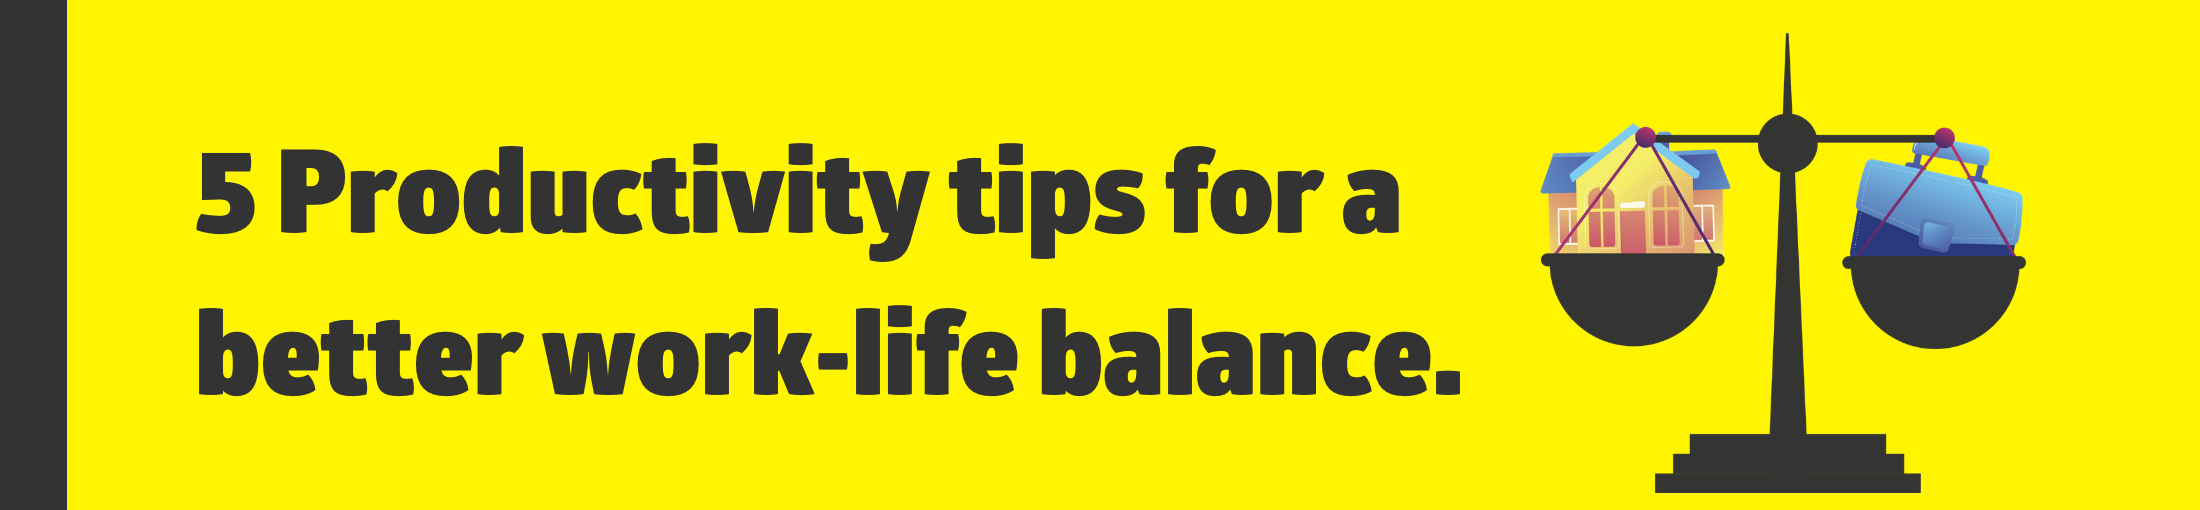 5 Productivity tips for a better work-life balance